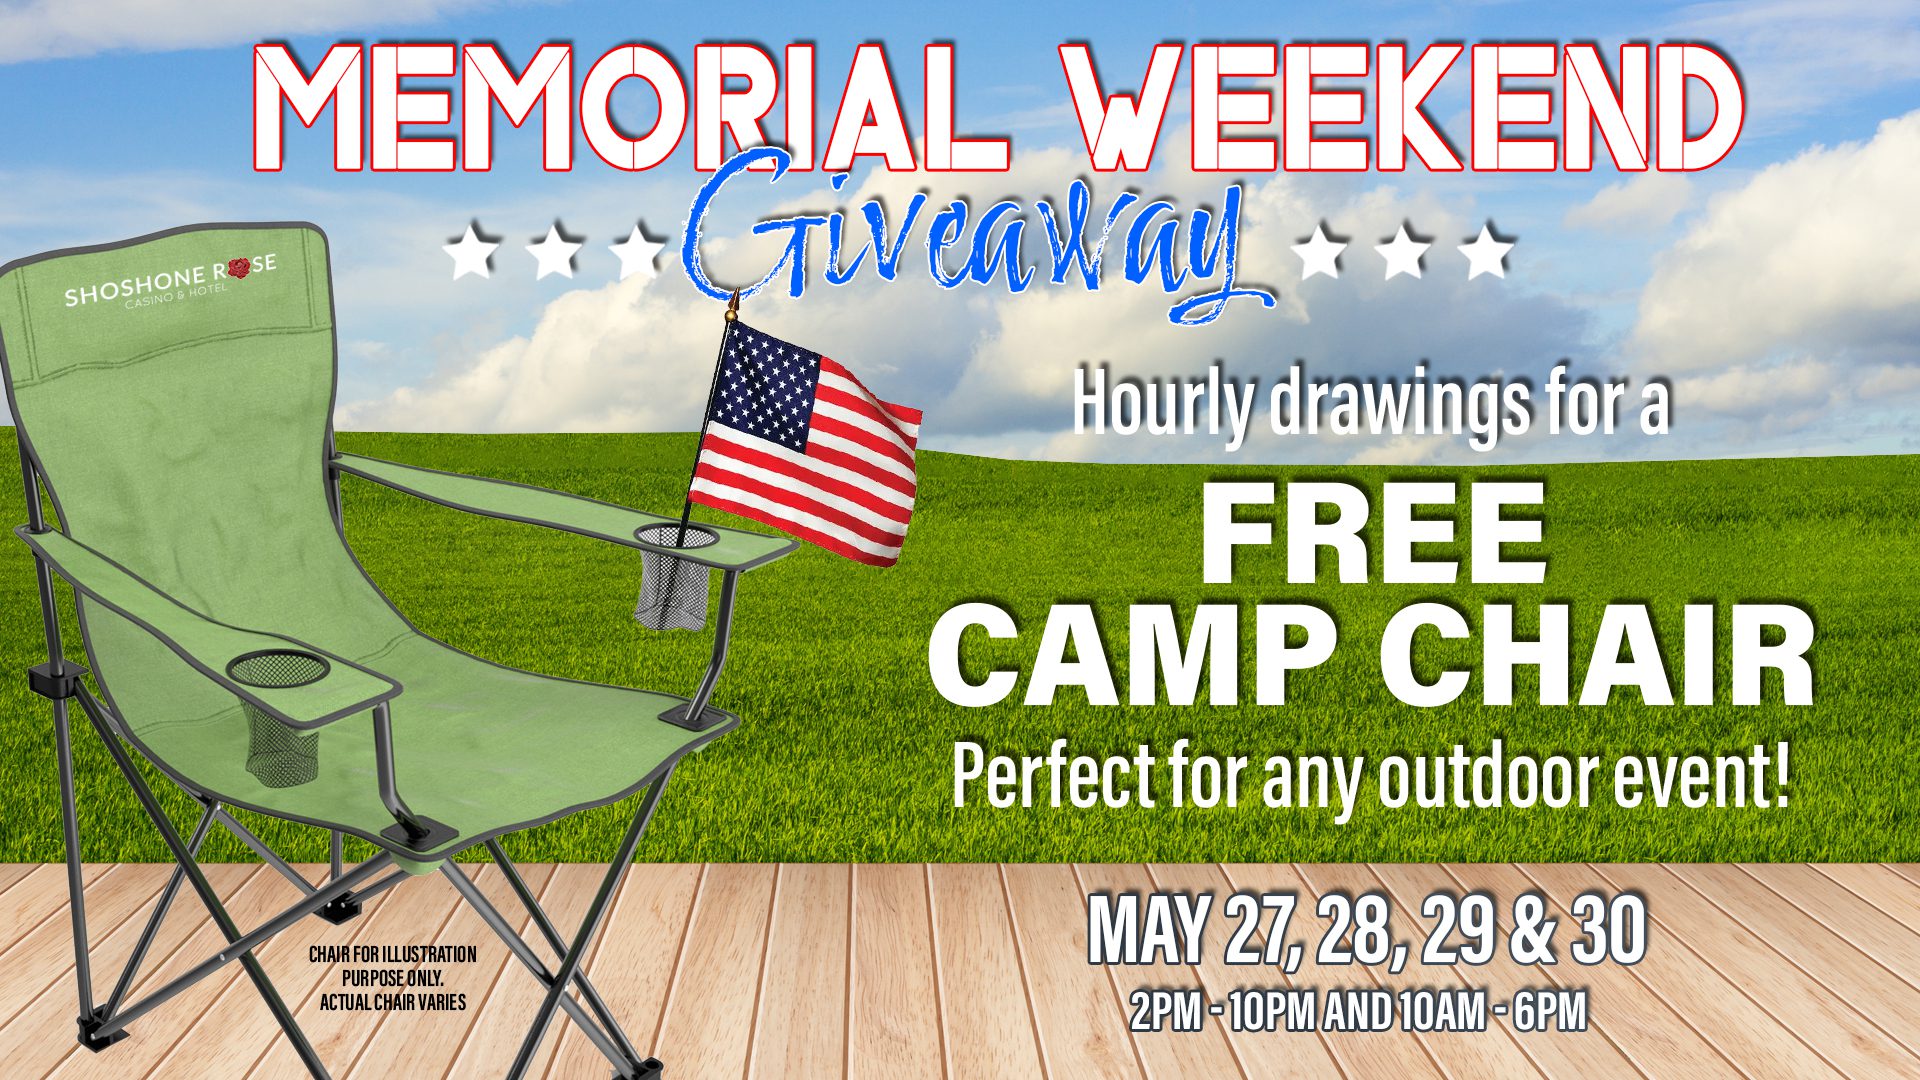 Memorial weekend giveaway featuring hourly drawings for a free camp chair, perfect for outdoor events, from may 27-30, between 2 pm-10 pm and 6 pm.